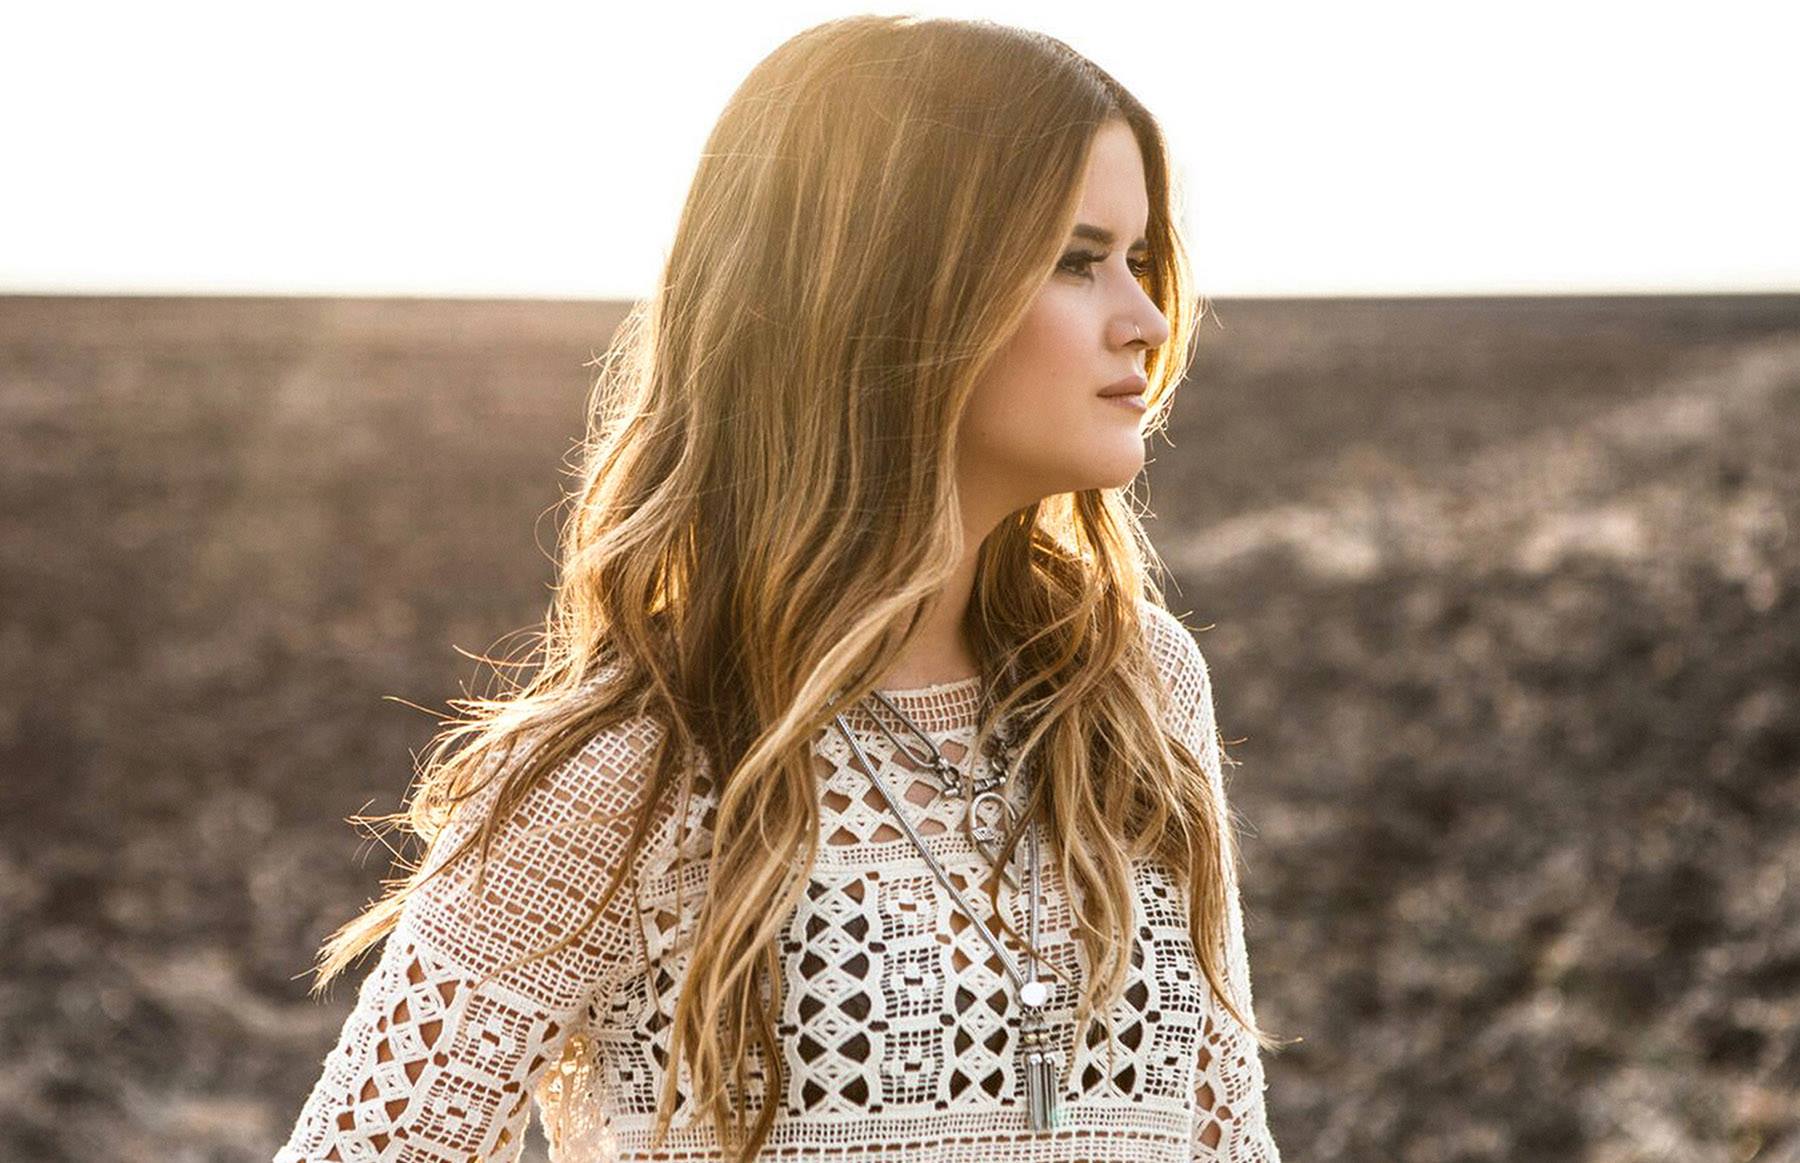 Maren Morris Covers Beyonce's 'Halo' And It's Positively Angelic